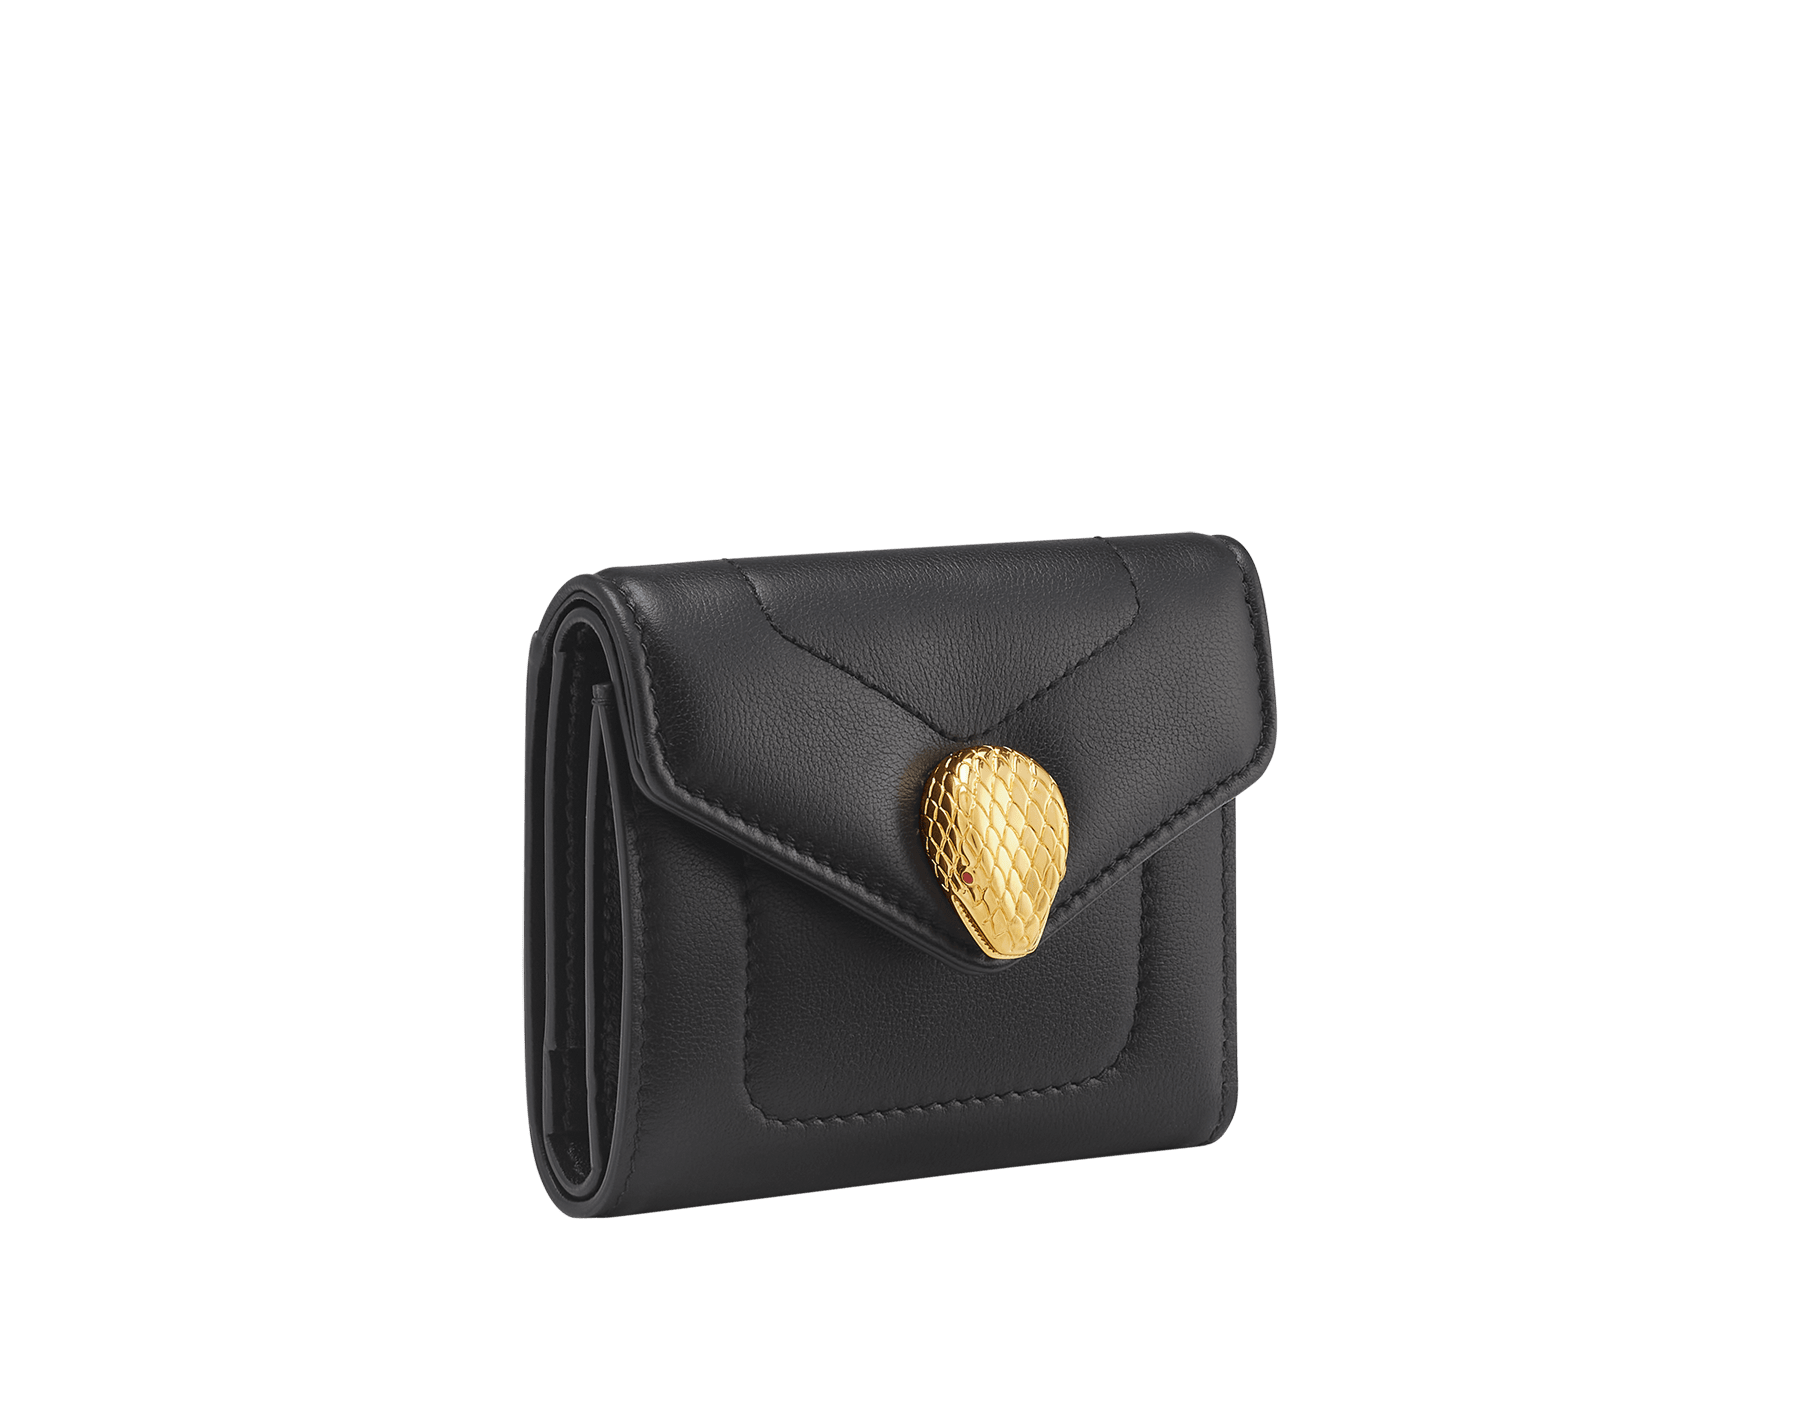 Serpenti Reverse compact wallet in Sahara amber light brown quilted Metropolitan calf leather with taffy quartz pink Metropolitan calf leather interior. Captivating snakehead press button closure in gold-plated brass embellished with red enamel eyes. SRV-COMPACTWLT image 1